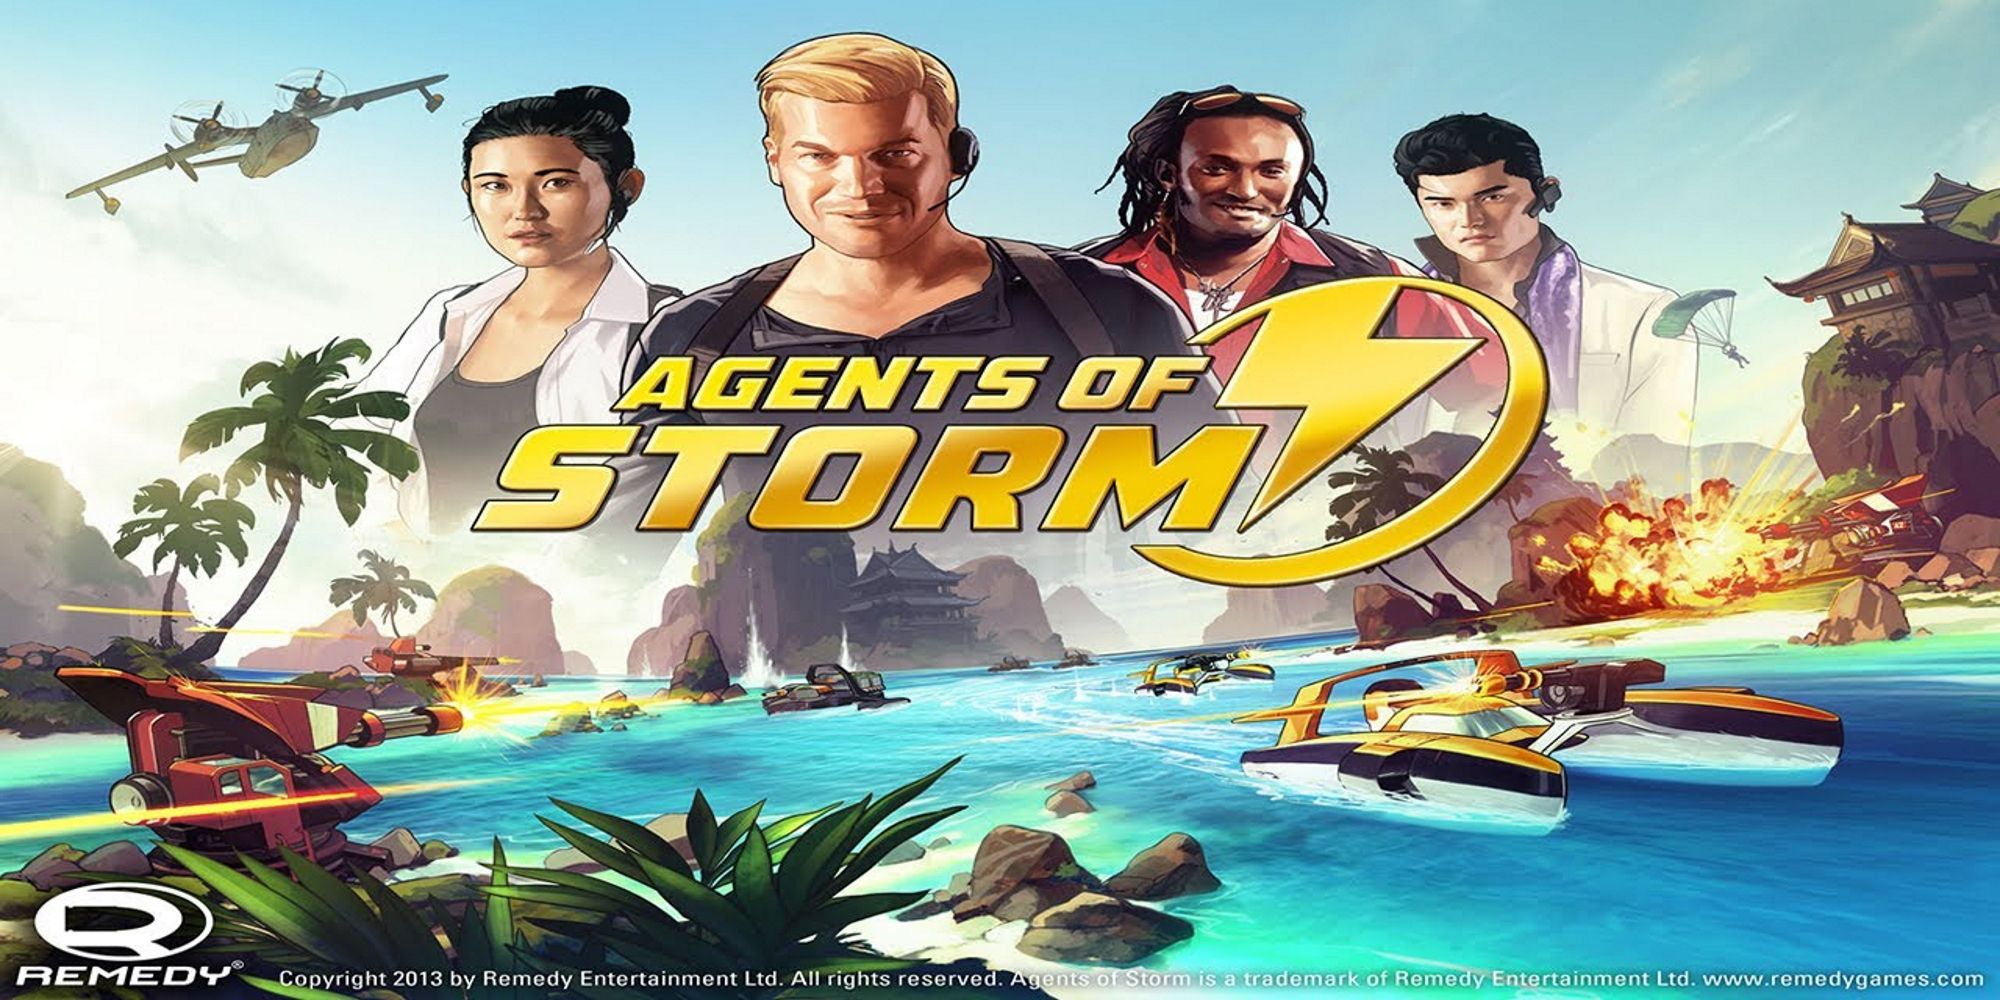 The cover art for the 2014 iOS freemium game Agents of Storm with the characters, island, and explosions.